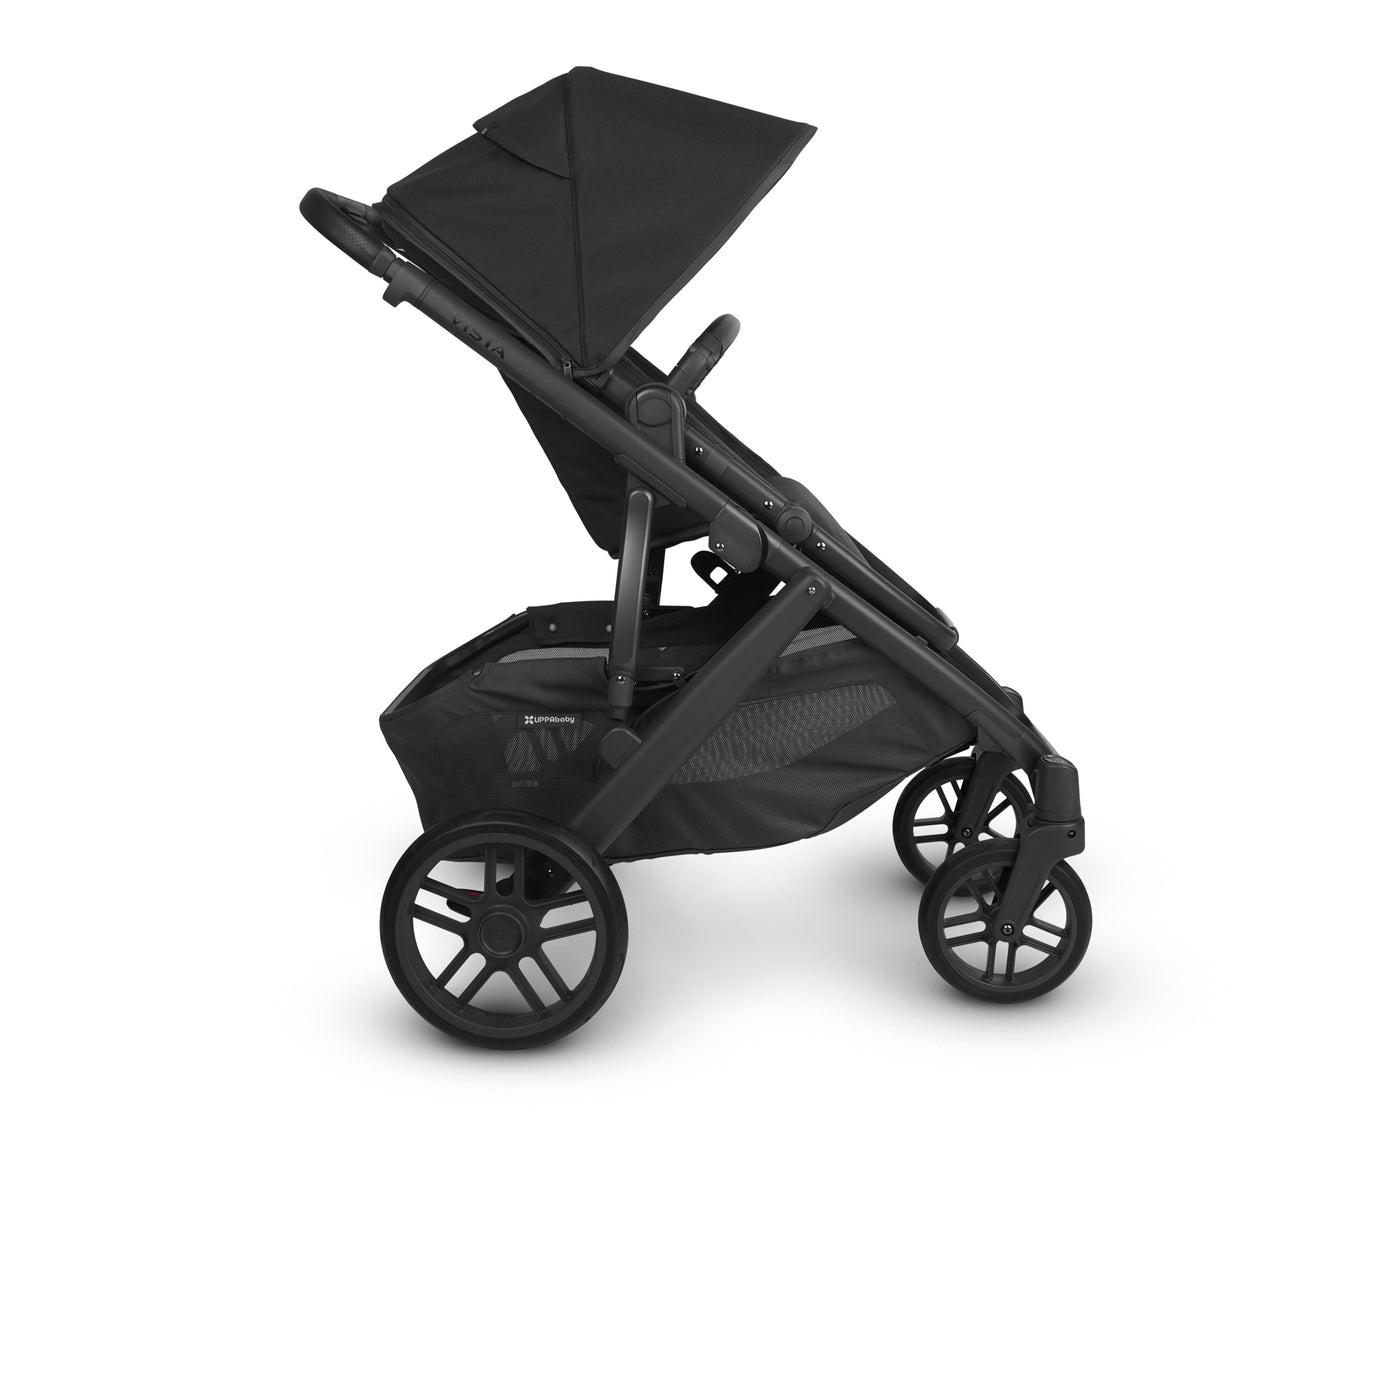 UPPAbaby VISTA V2 Pushchair and Carrycot - Jake